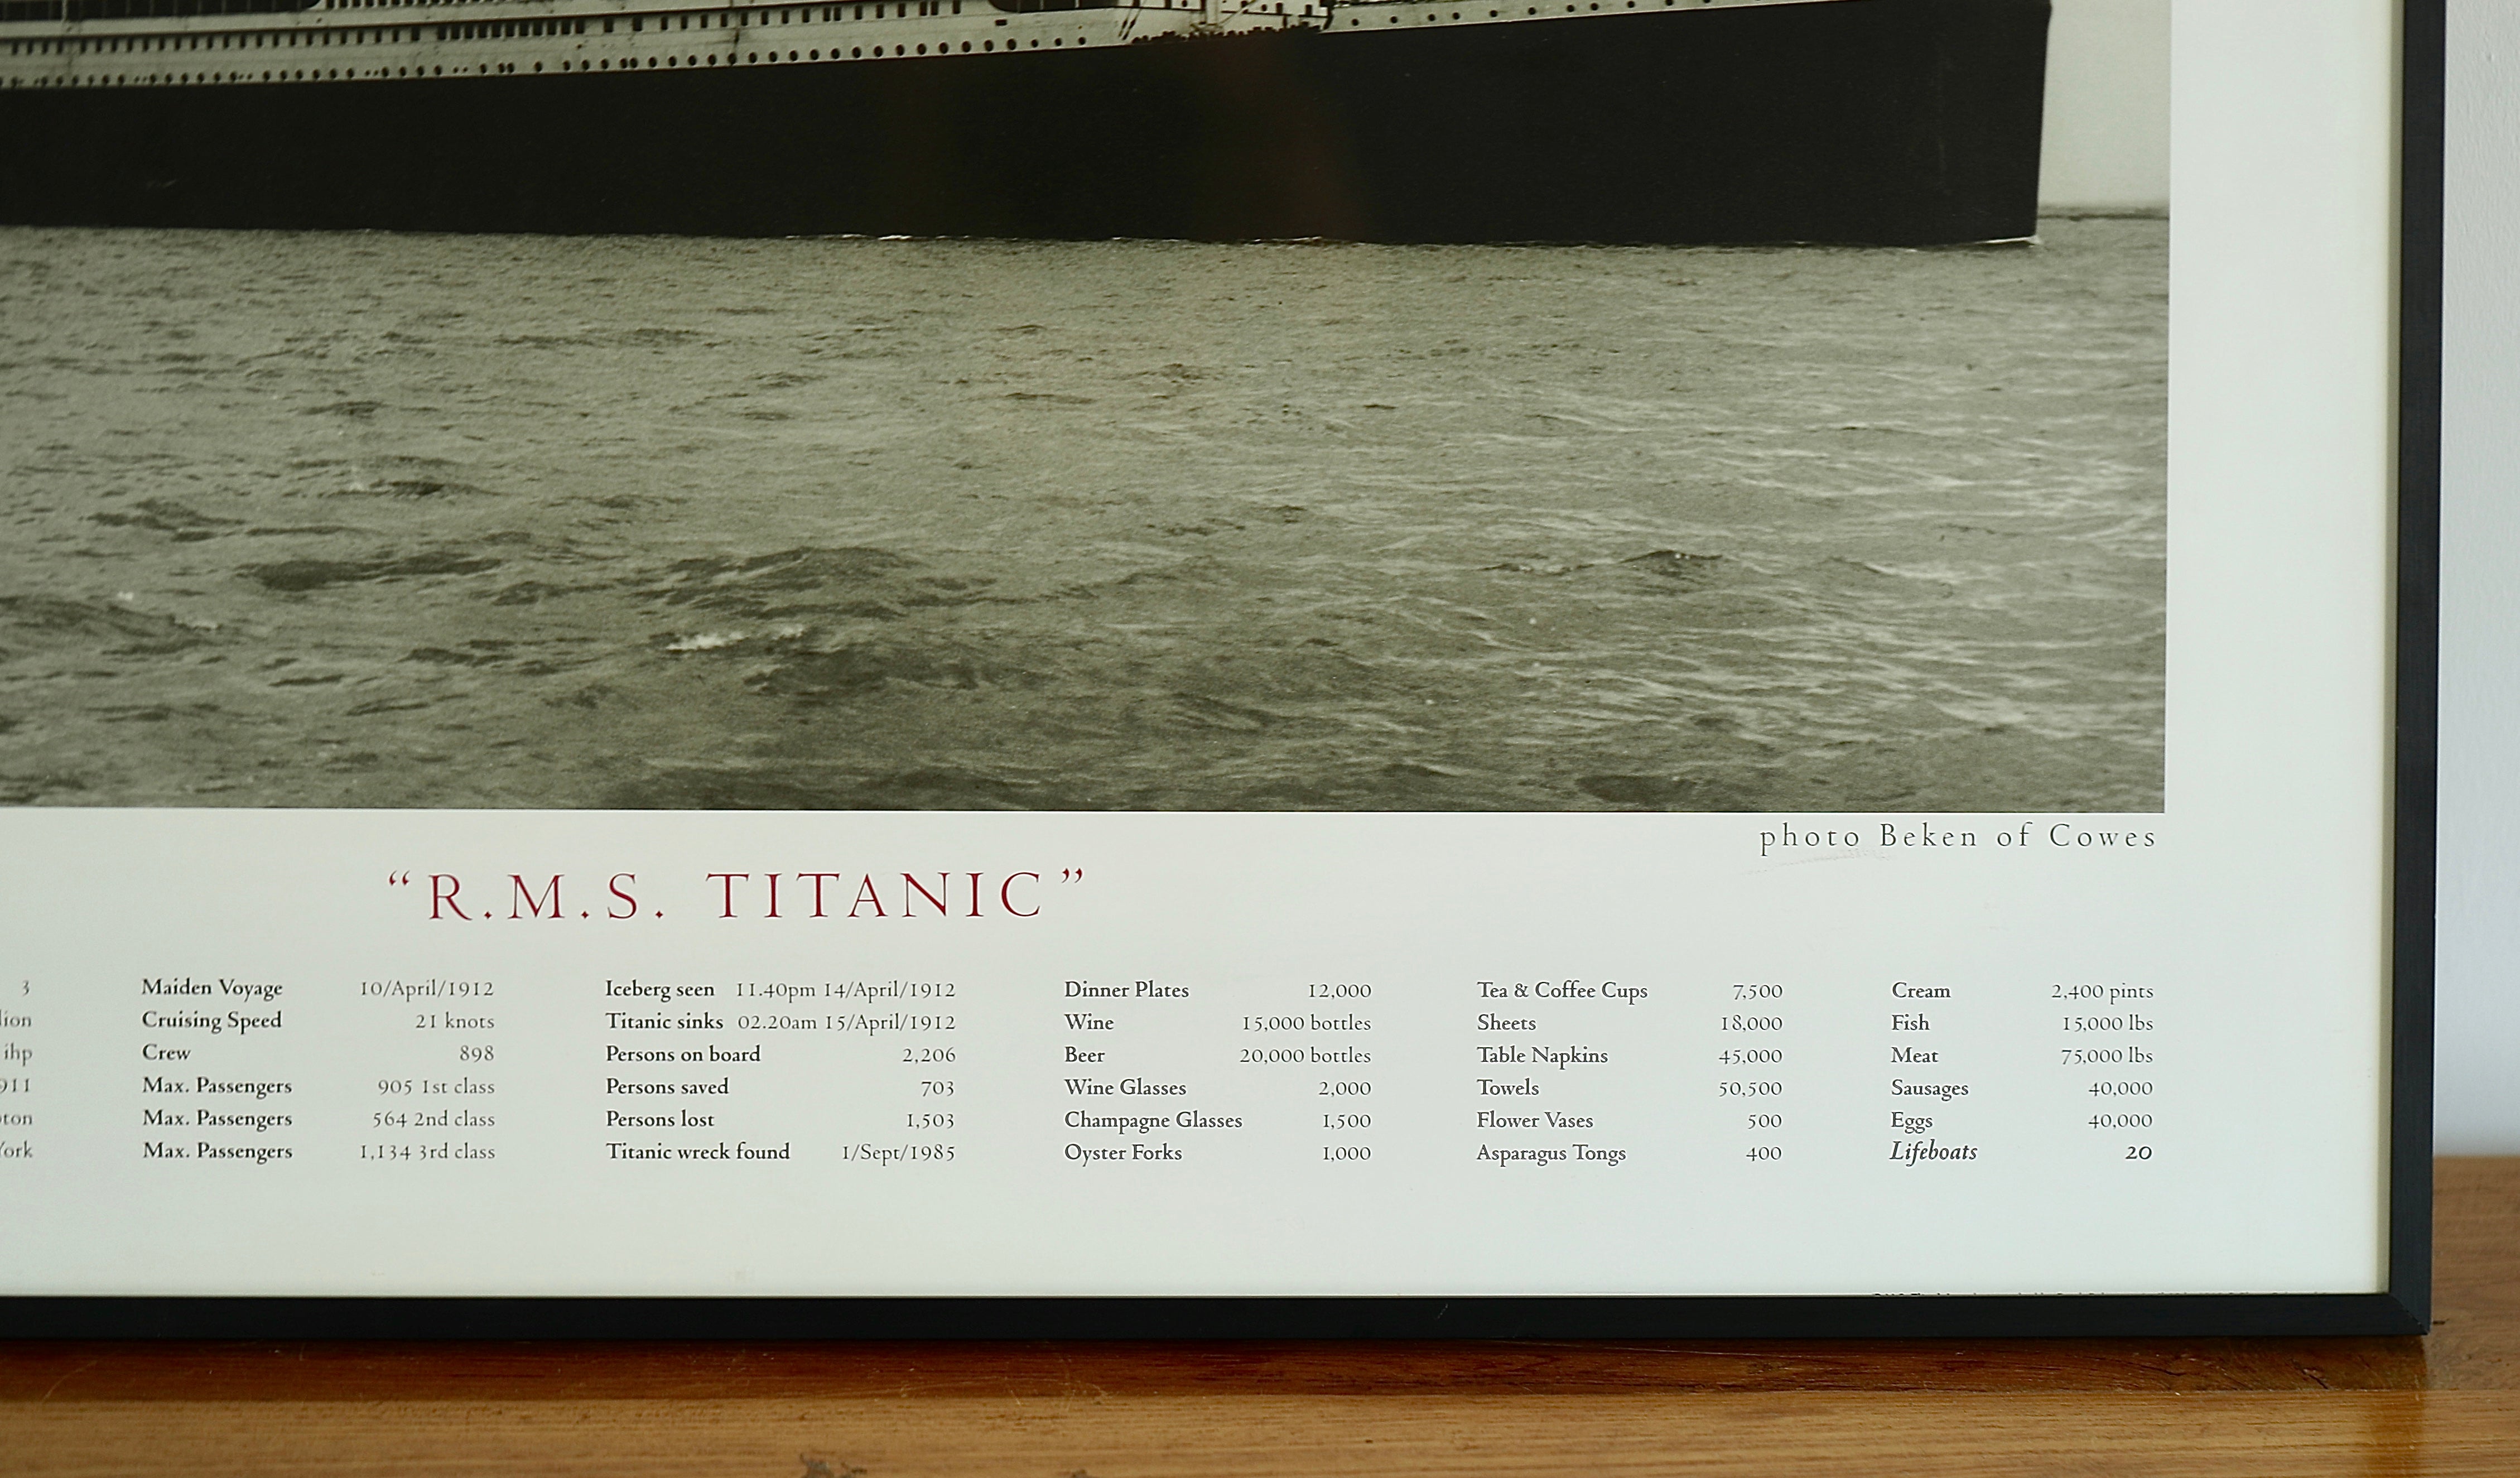 BEAUTIFUL FRAMED POSTER OF THE TITANIC